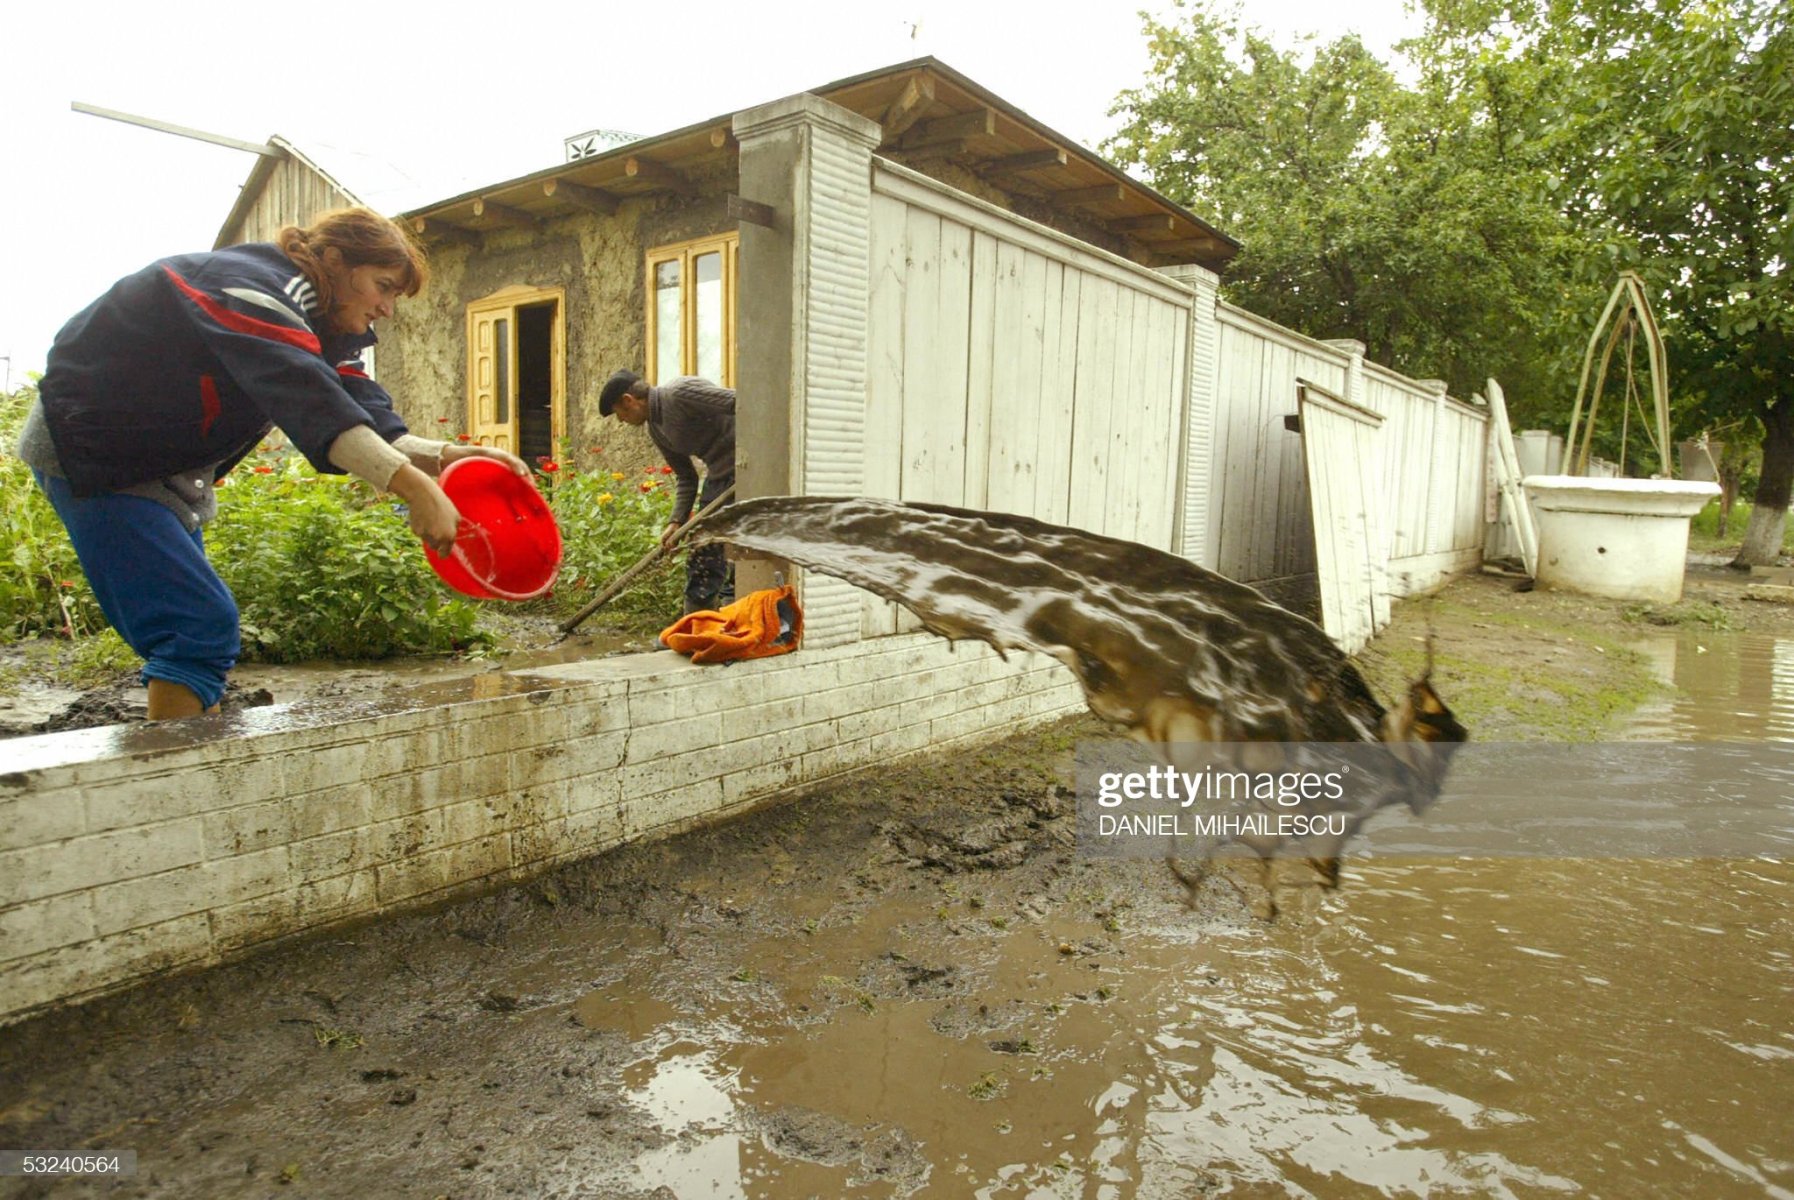 FUNDENI, ROMANIA:  A villager throuts out water from her flooded courtyard after a flash flood caused by Siret river in Fundeni village, 300 kms north-east from Bucharest, 15 July 2005. Seven people were killed and seven are missing after severe flooding in Romania that has affected 30 of the countries 42 regions, authorities said 13 July. An estimated 210,000 hectares (500,000 acres) of crops have also been damaged at a cost of 500 million euros (600 million dollars), according to government estimates. The flooding began on Tuesday after two weeks of heavy rains and has inundated thousands of homes and cut roads and railway lines, blocking traffic in several regions. Press reports said the floods, which have damaged thousands of homes and dozens of bridges, roads and railway lines, were the worst in the country for 30 years. AFP PHOTO DANIEL MIHAILESCU  (Photo credit should read DANIEL MIHAILESCU/AFP via Getty Images)